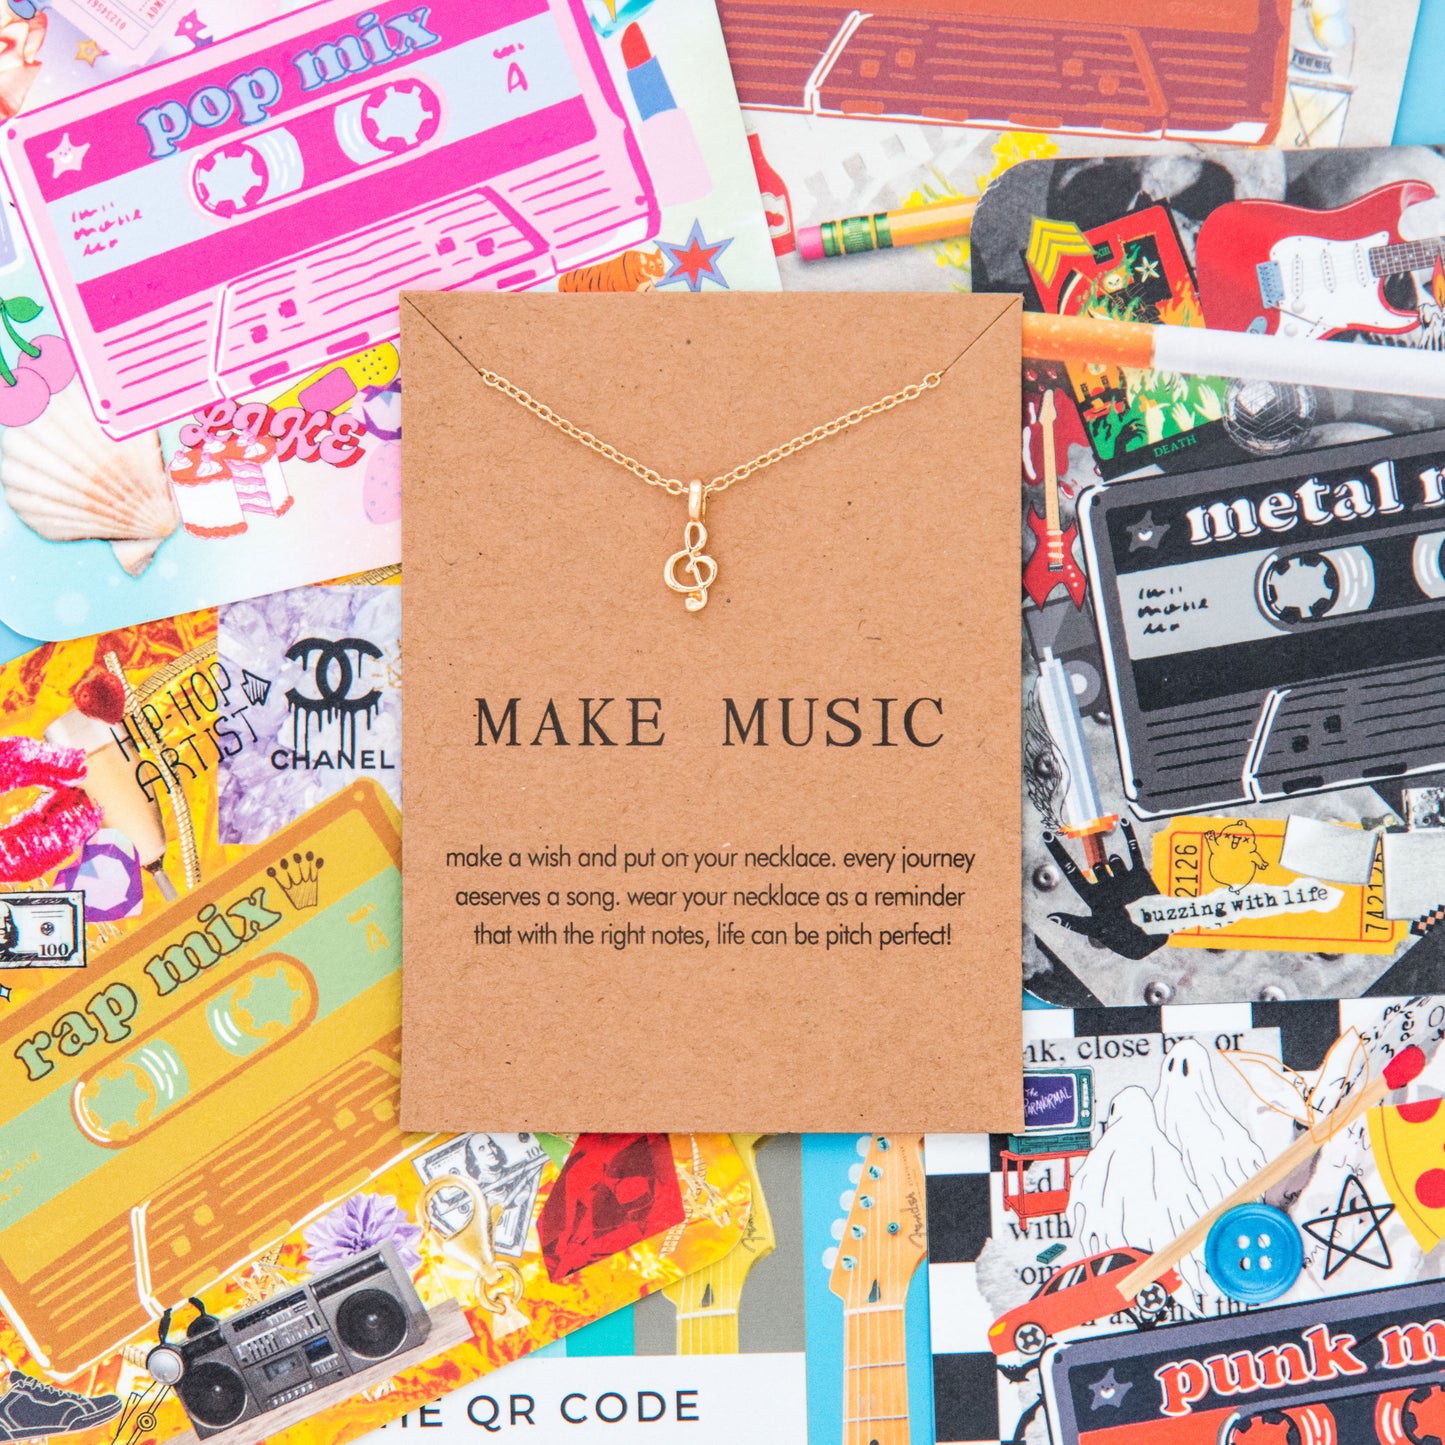 Bring music into your life with this unique music note necklace and matching paper coasters featuring different genres like rap and punk rock. The necklace is accompanied by a boom box pin, concert greeting card, quirky guitar earrings, Billie Eilish page flags, and a pop-up book on music history. Get ready to rock and roll and jazz up your home with these eclectic music-themed items.